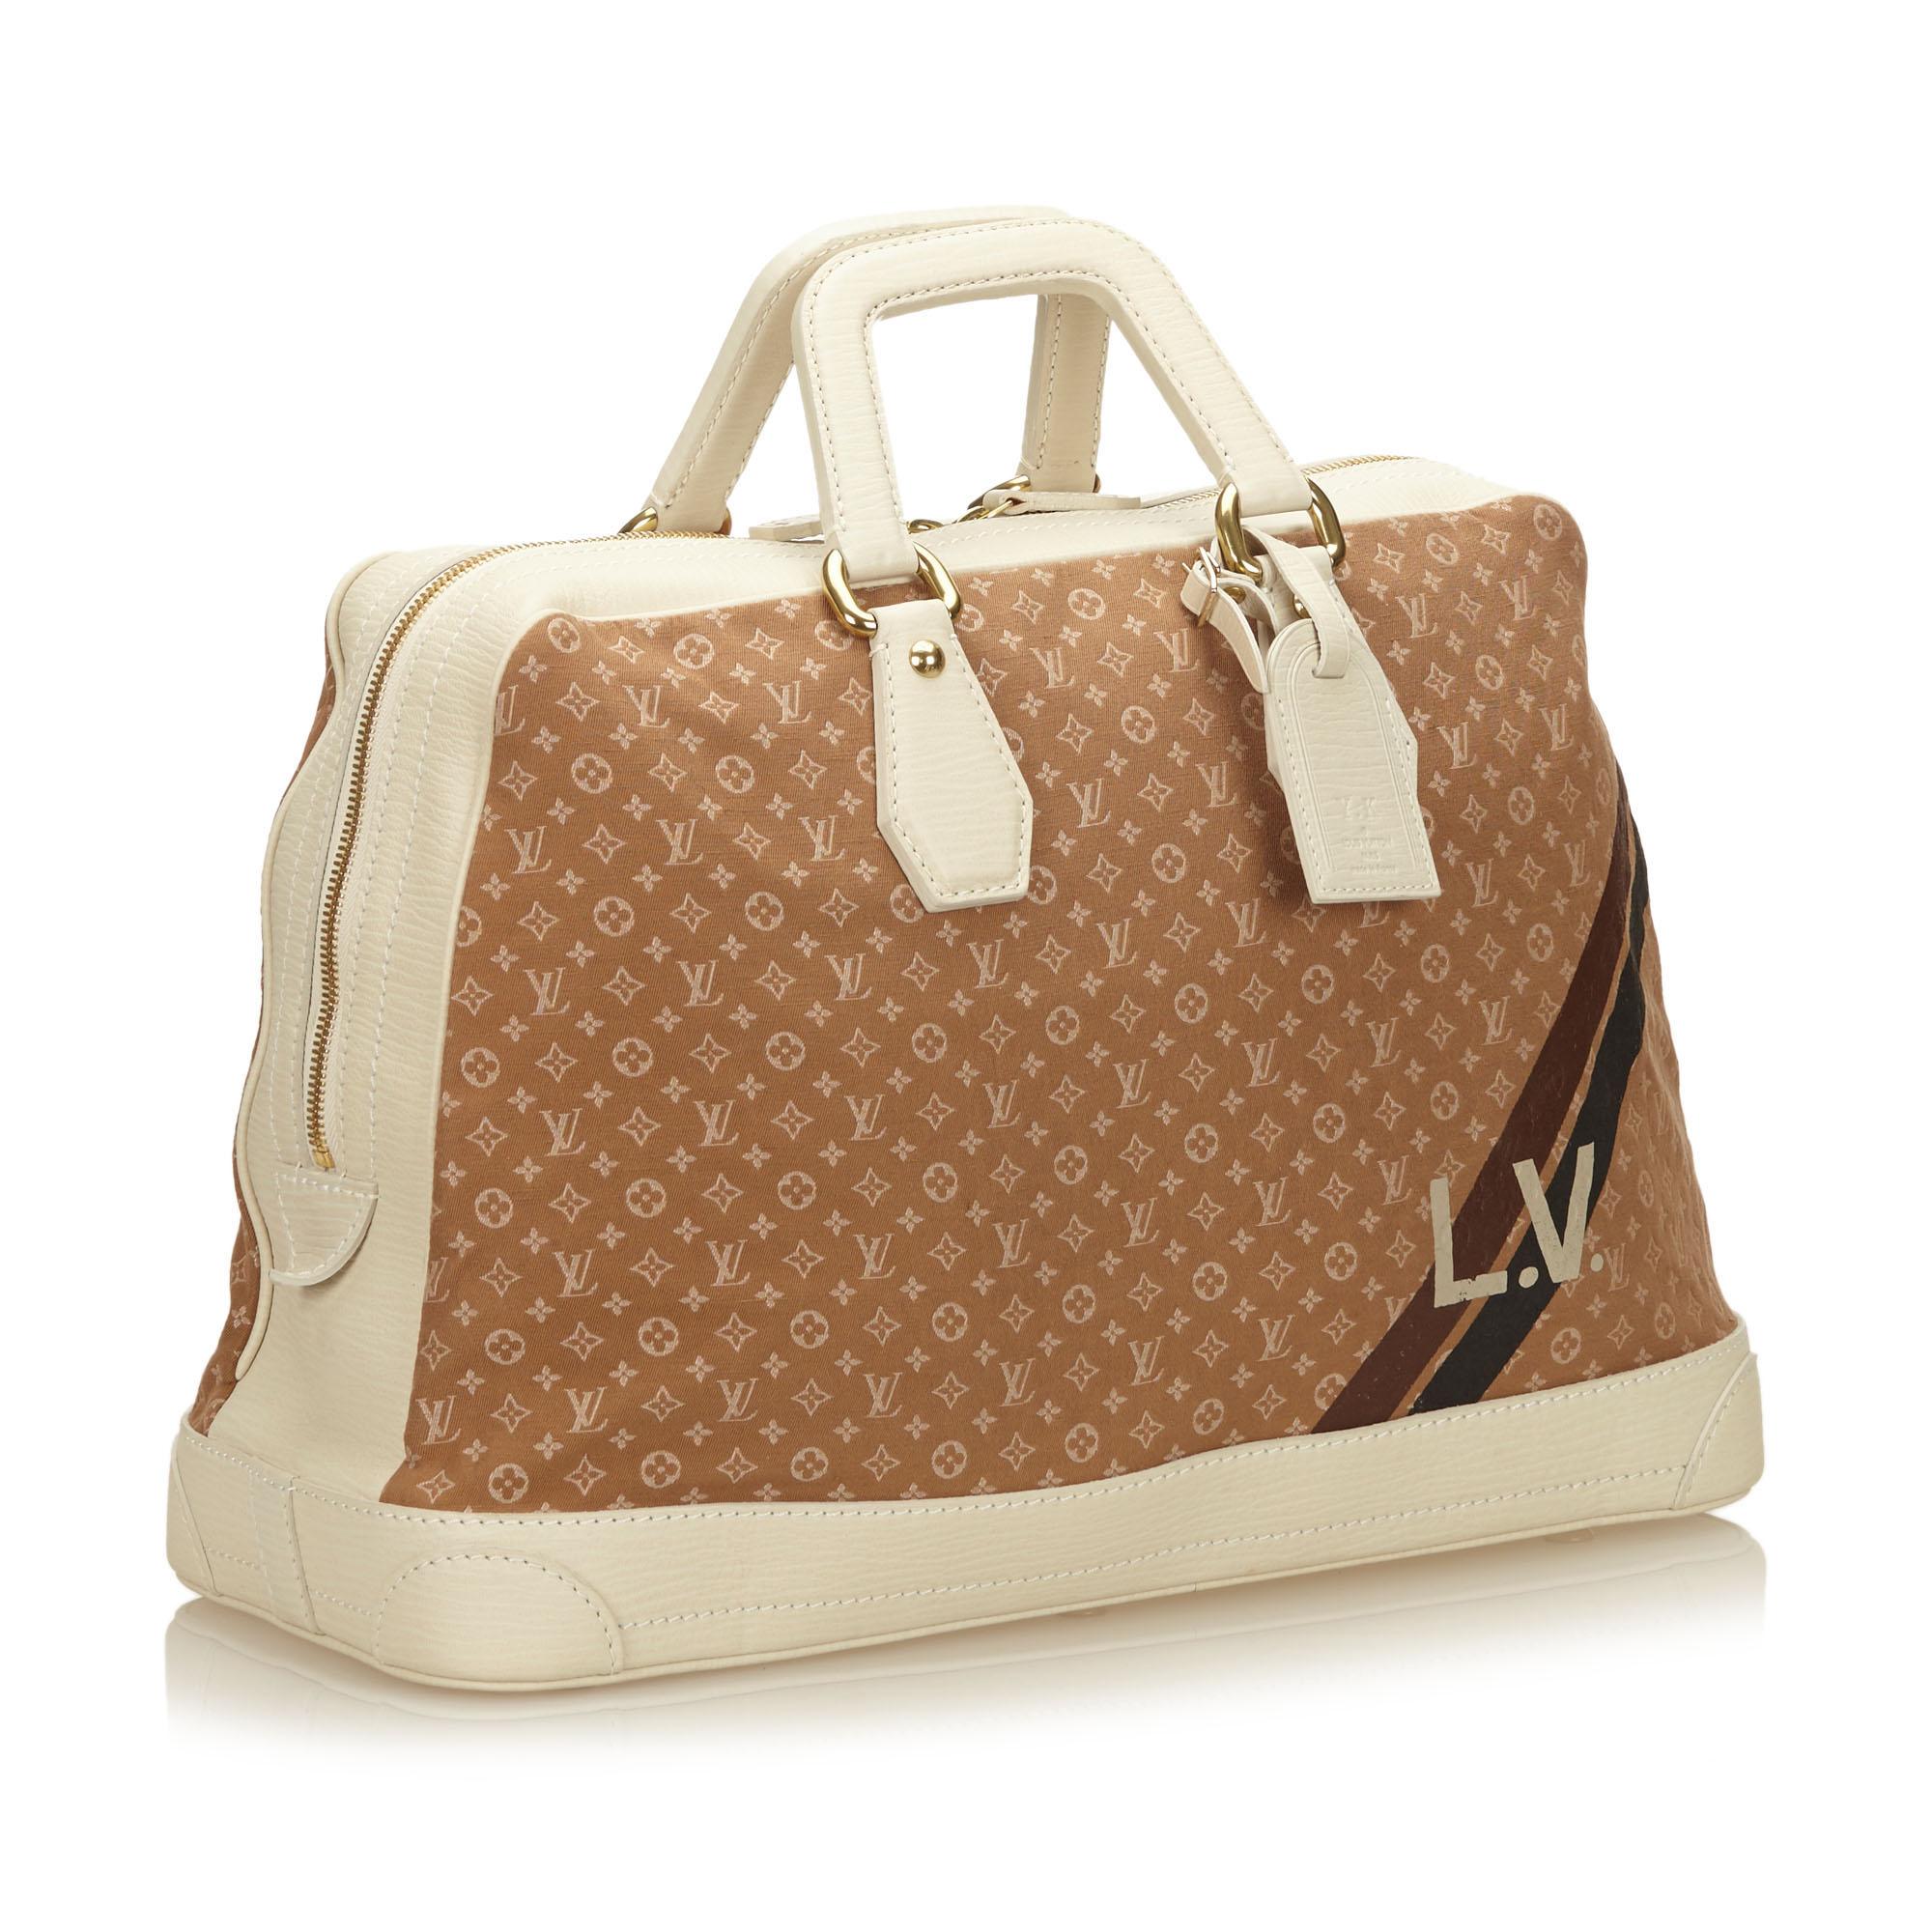 The Mini Lin Initiales Isfahan features a Monogram Mini Lin canvas body, flat handles, top zip closure, and an interior zip pocket.

It carries a AB condition rating.

Dimensions: 
Length 33.00 cm
Width 47.00 cm
Depth 19.00 cm
Shoulder Drop 20.00